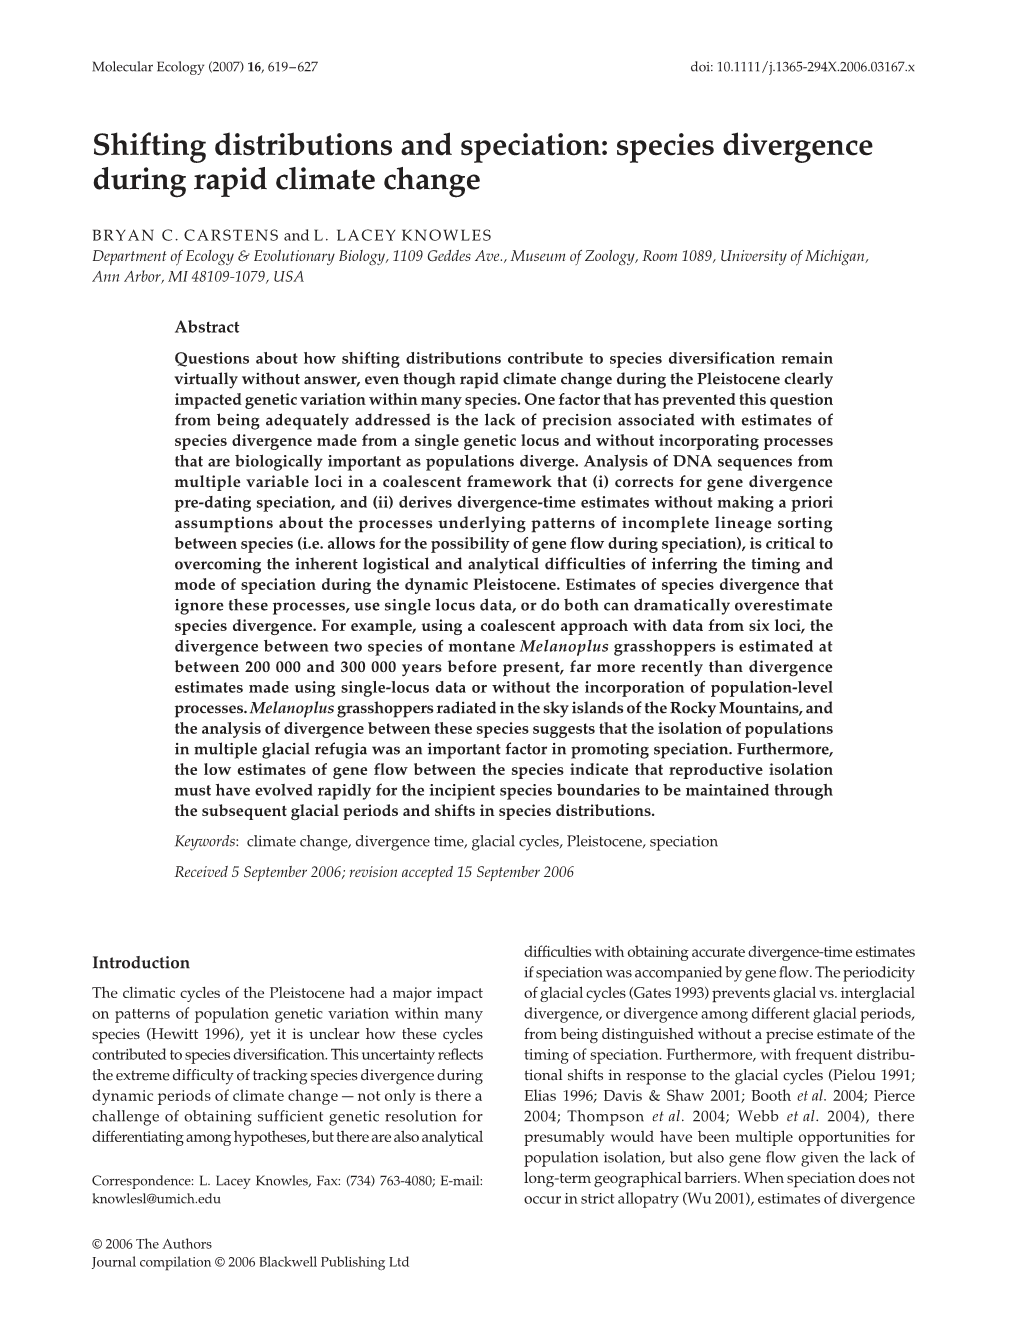 Species Divergence During Rapid Climate Change